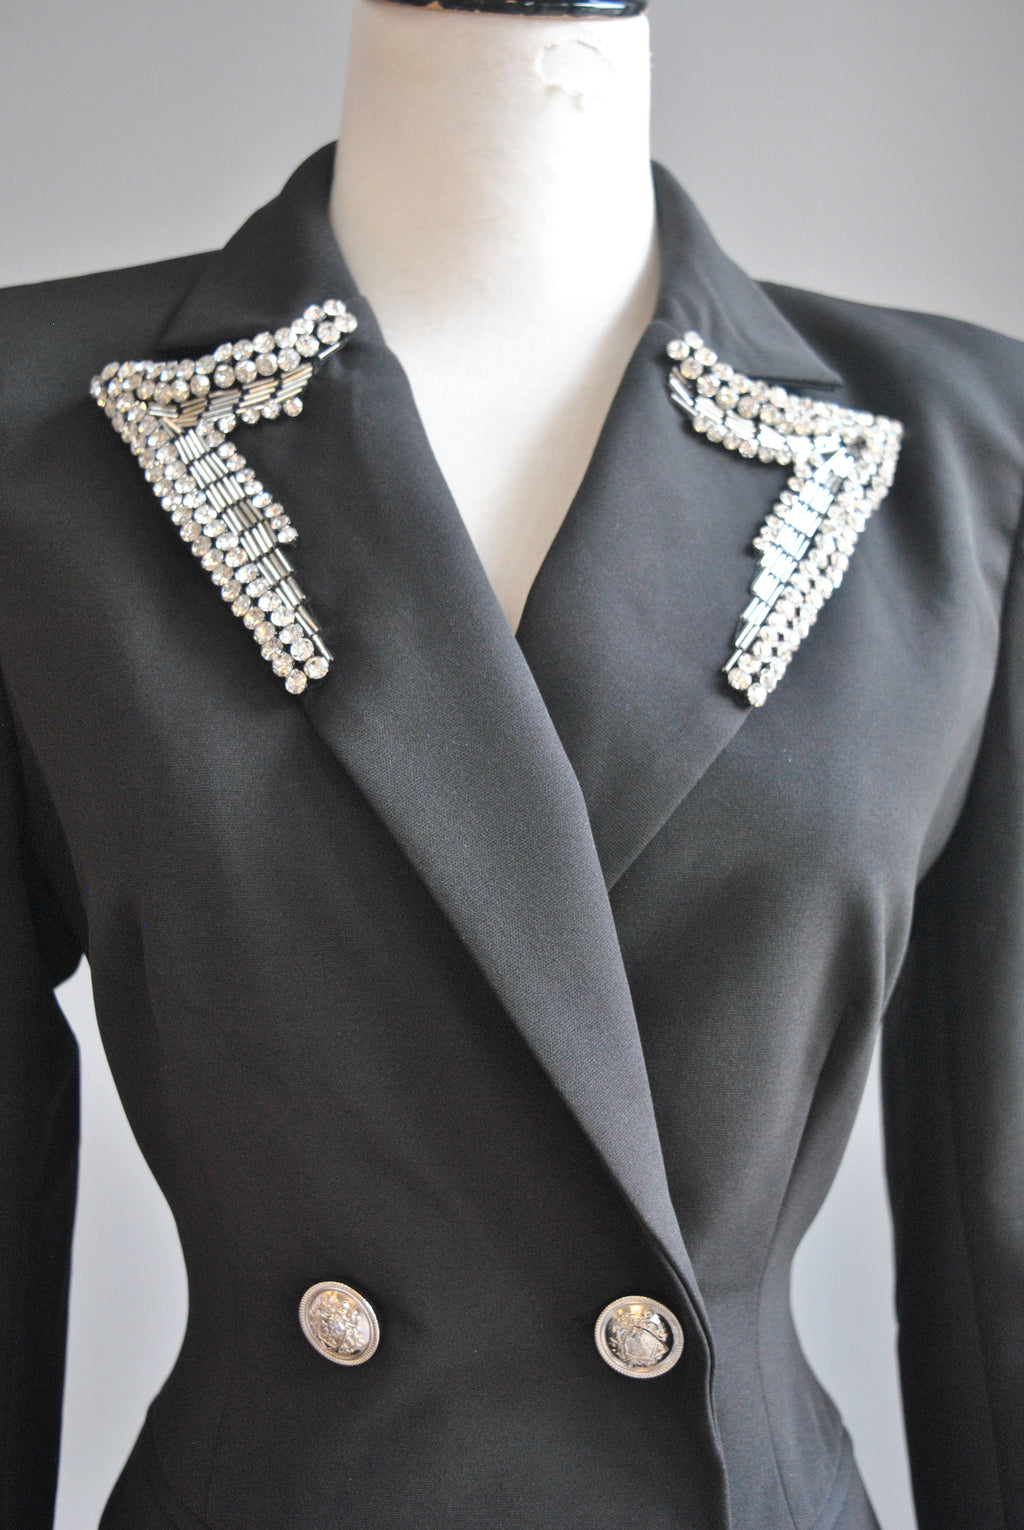 BLACK DOUBLE BREASTED BLAZER WITH DIAMOND DETAILS